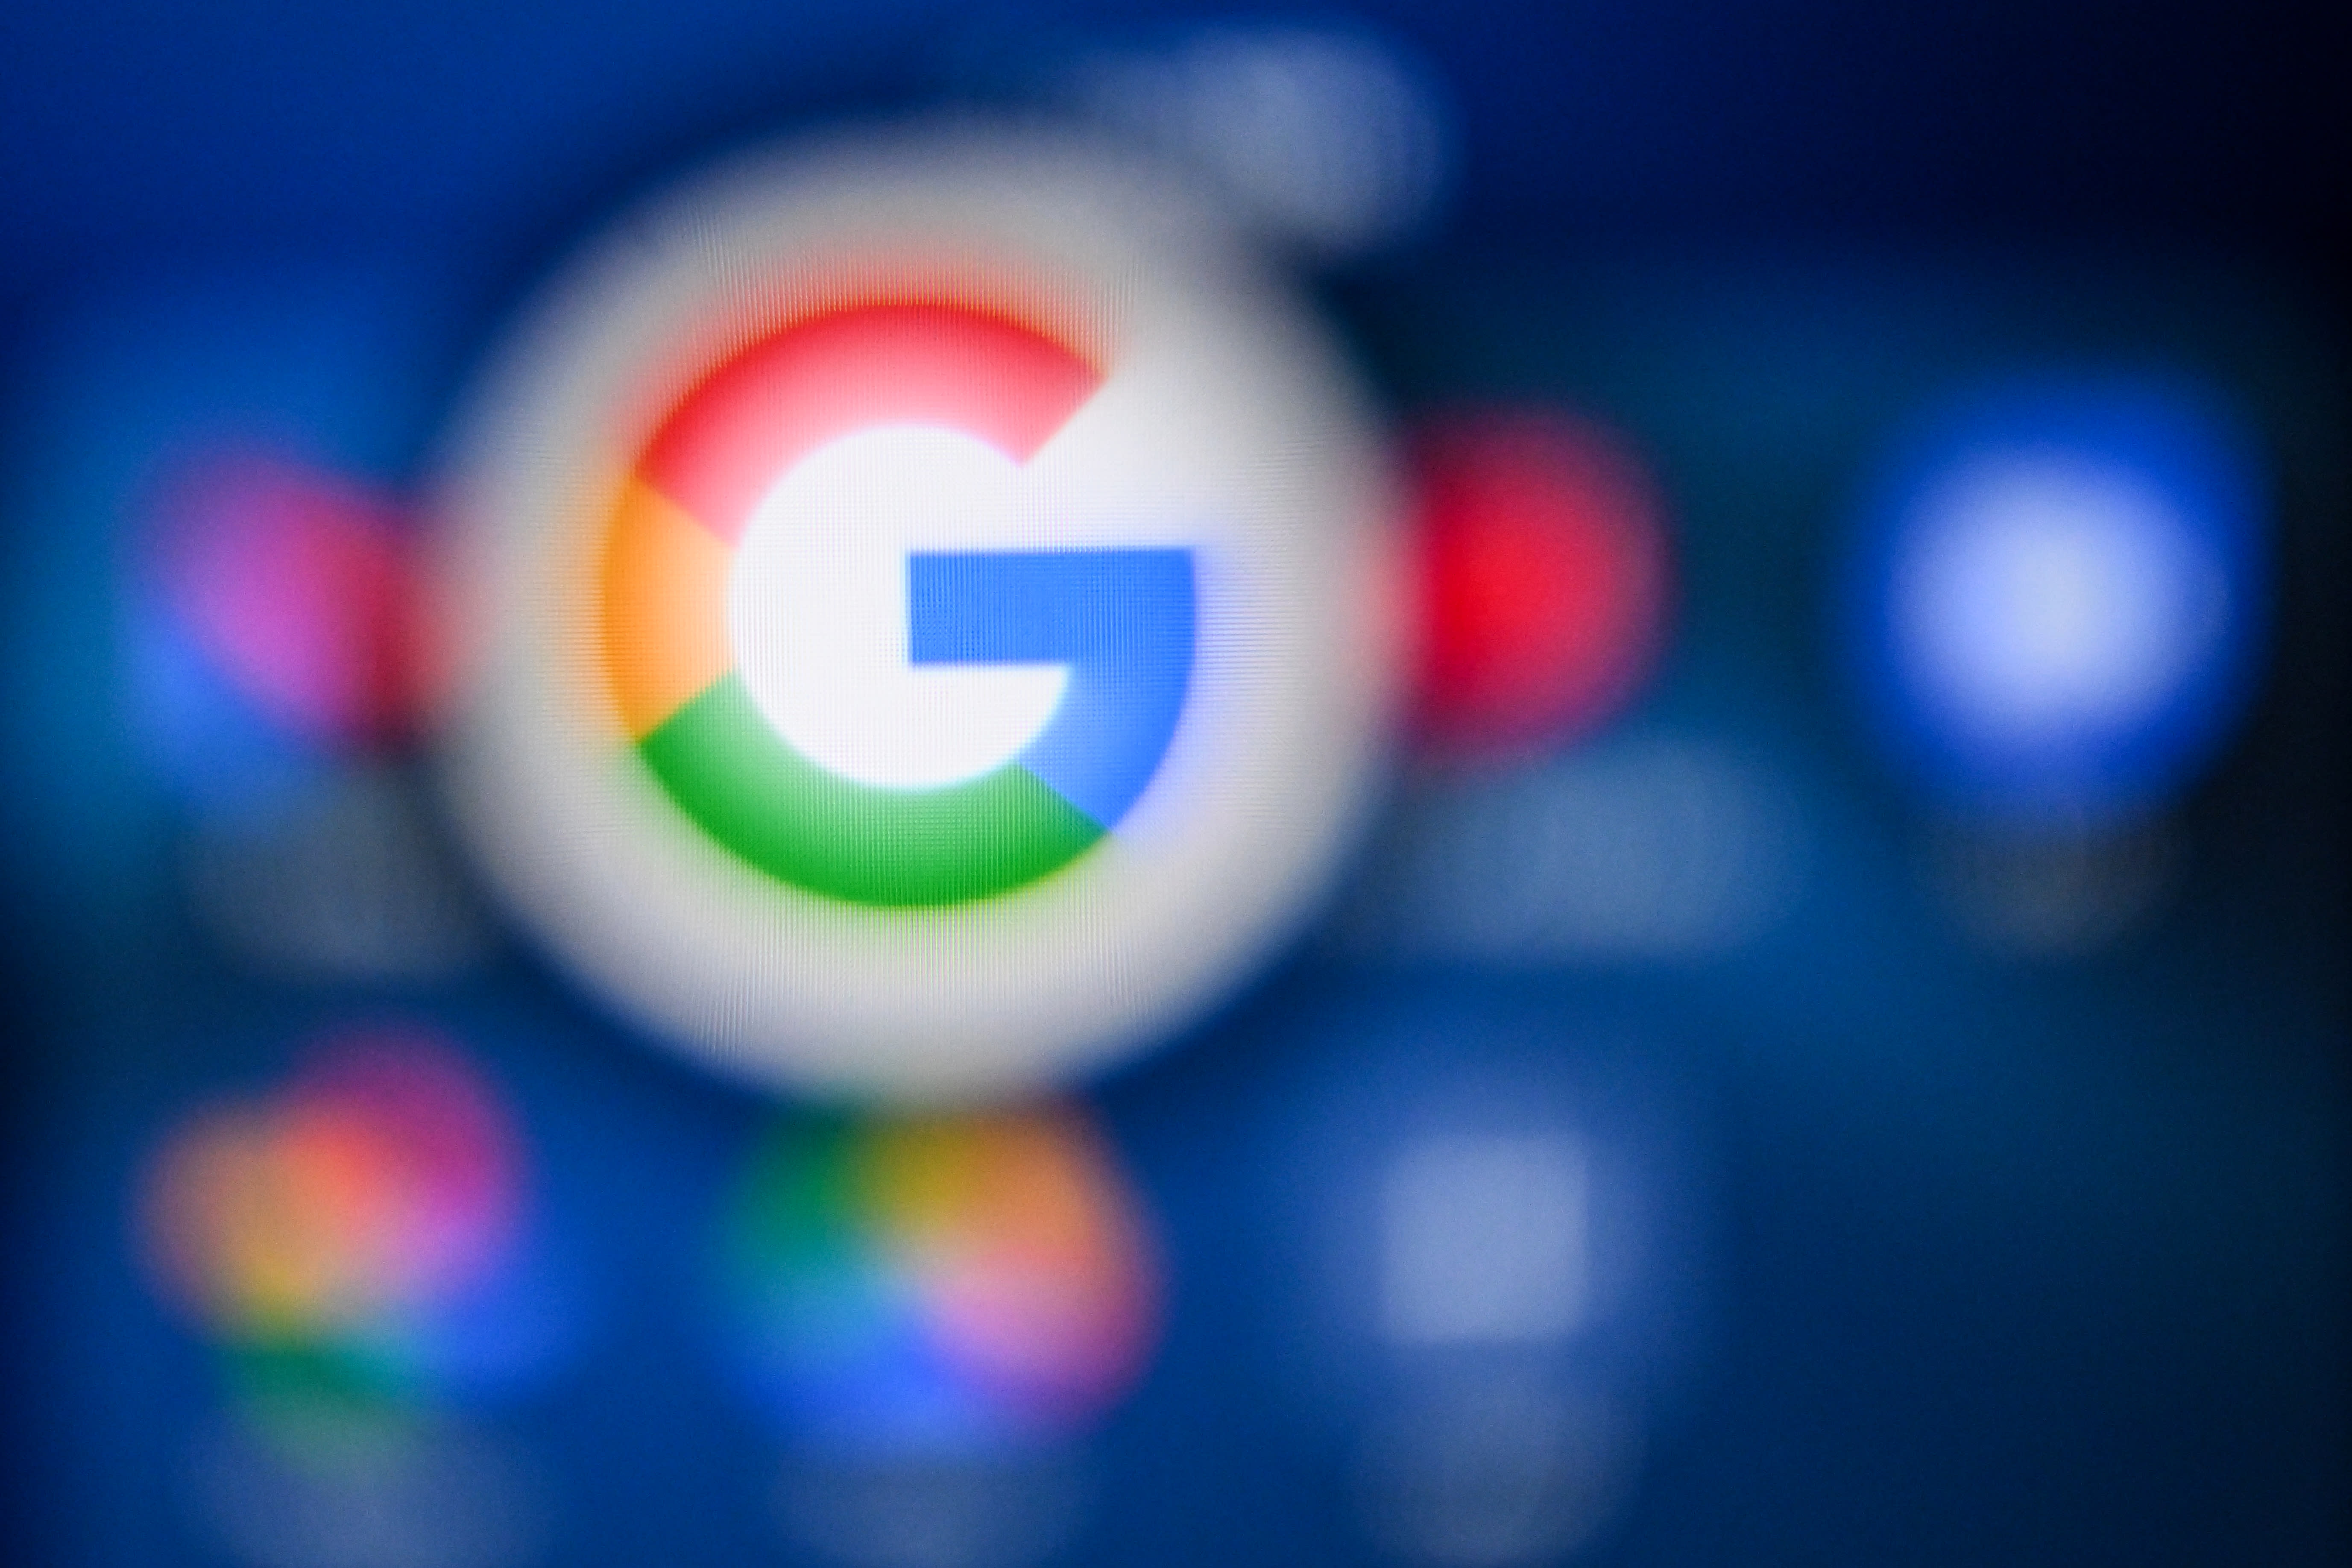 Until now, Google would only accept requests to remove webpages that shared contact info alongside some sort of threat or required payment for removal. 